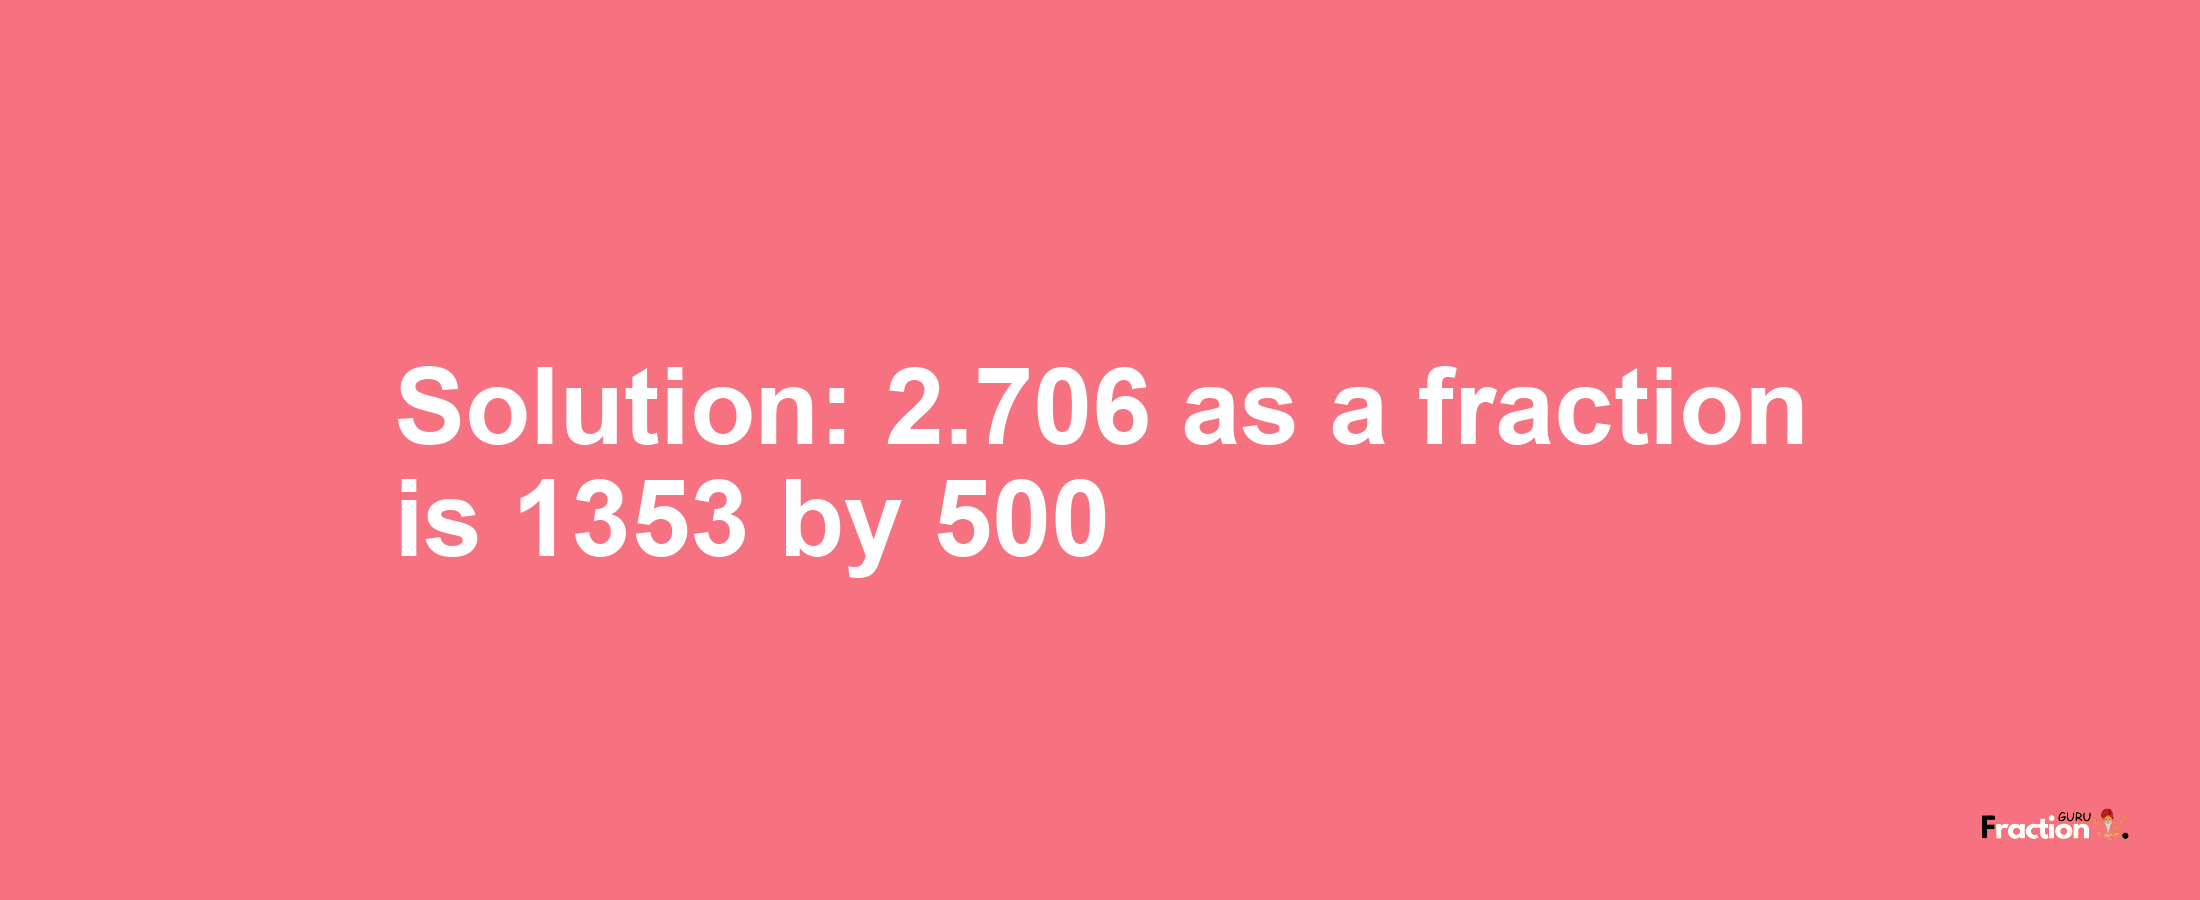 Solution:2.706 as a fraction is 1353/500